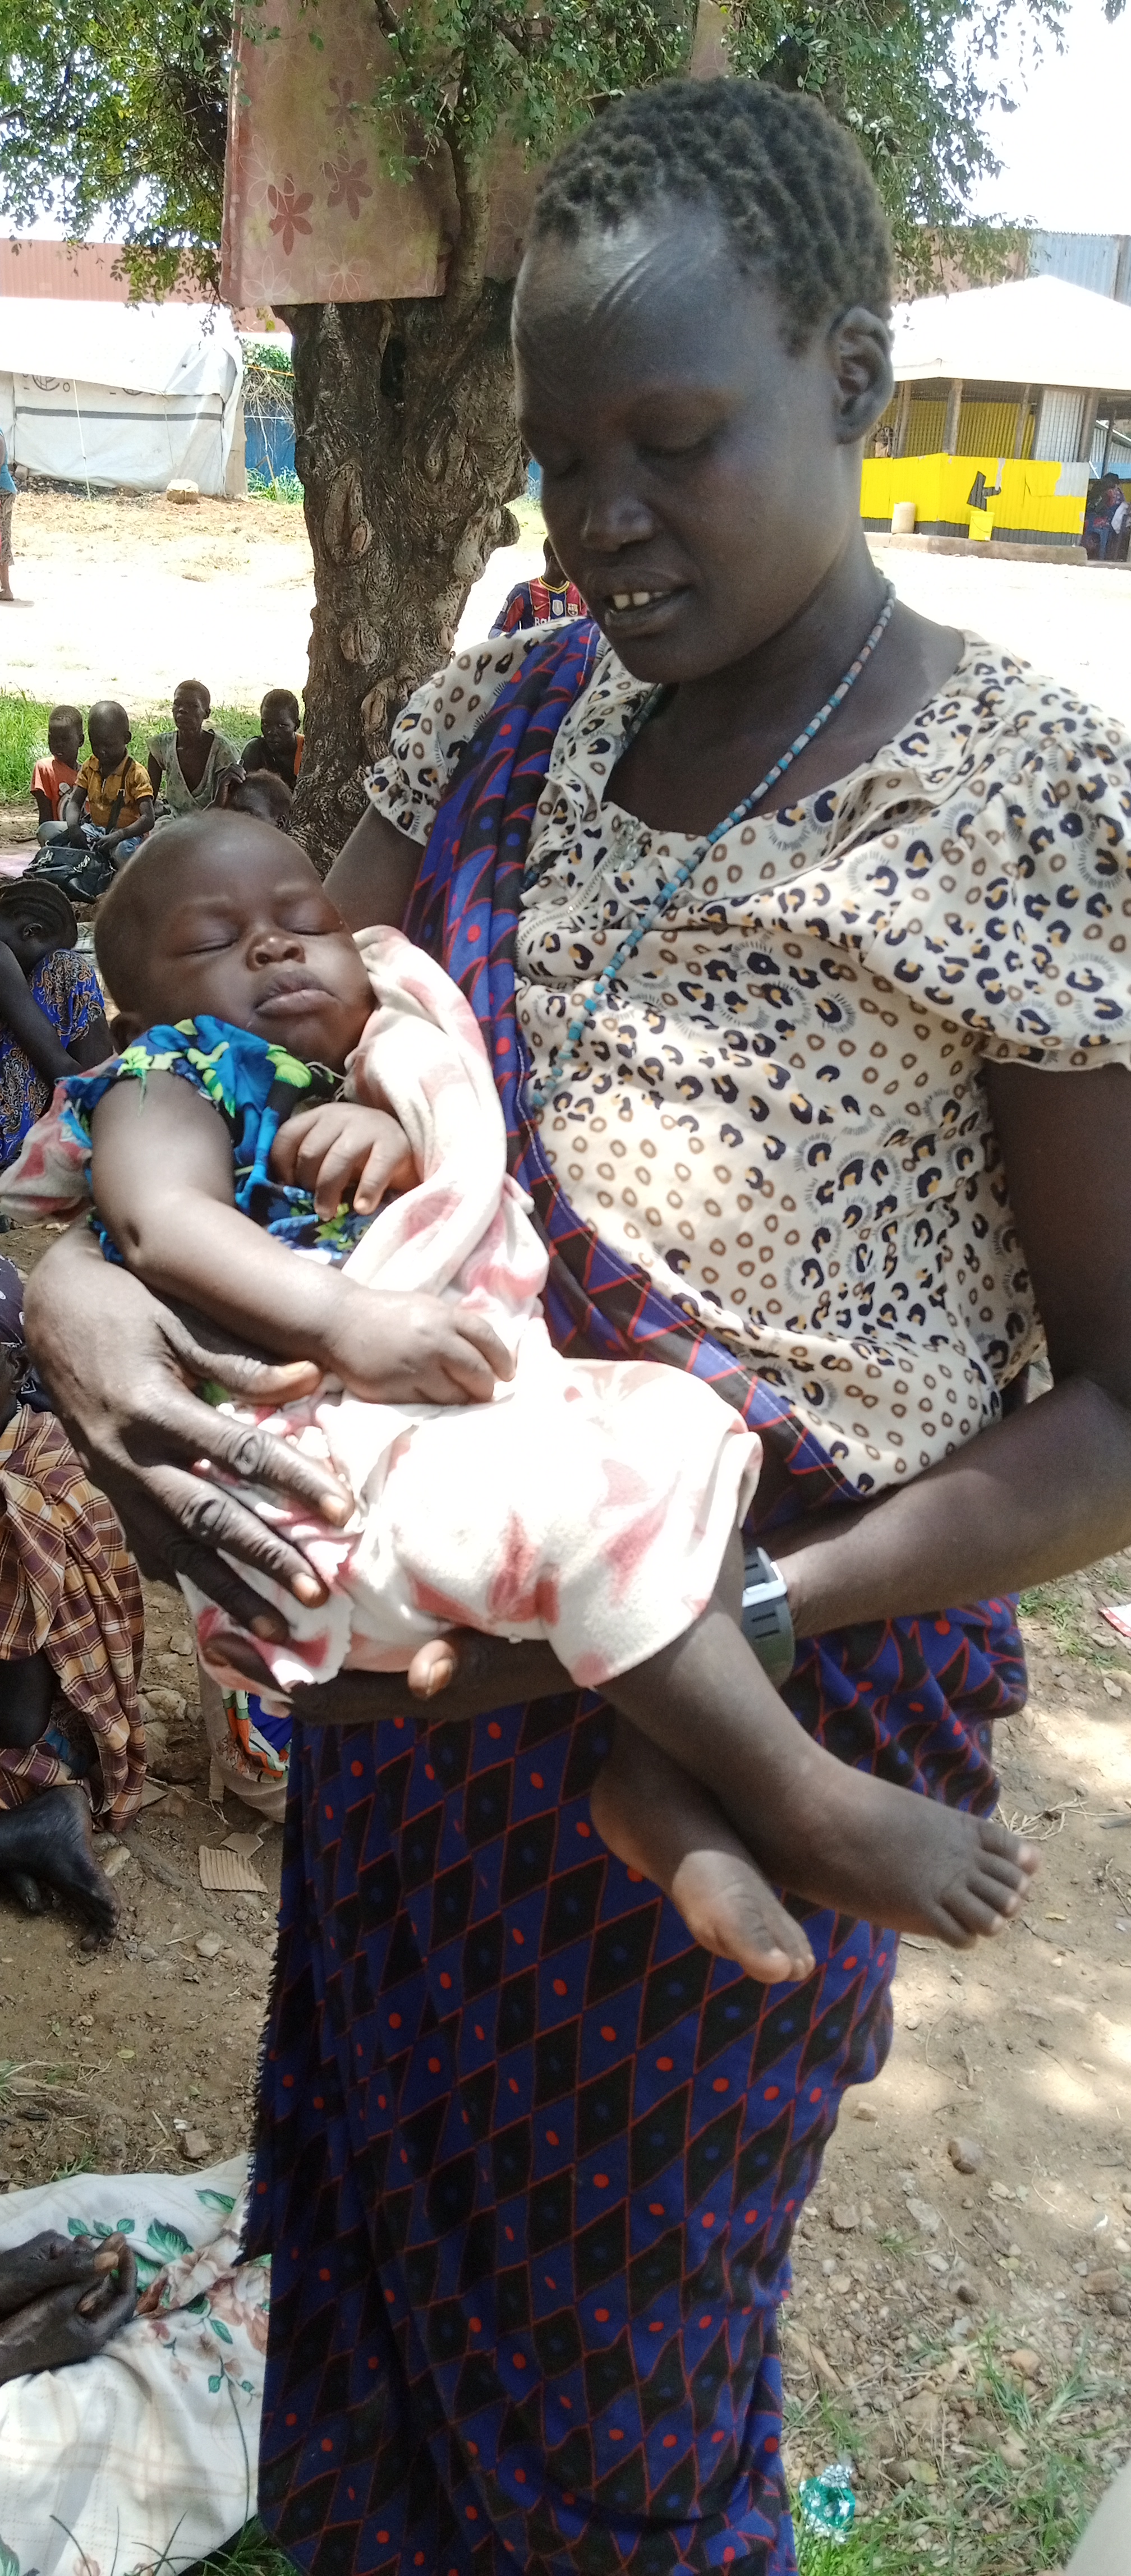 10-month-old baby left without a mother by Kworjik fighting